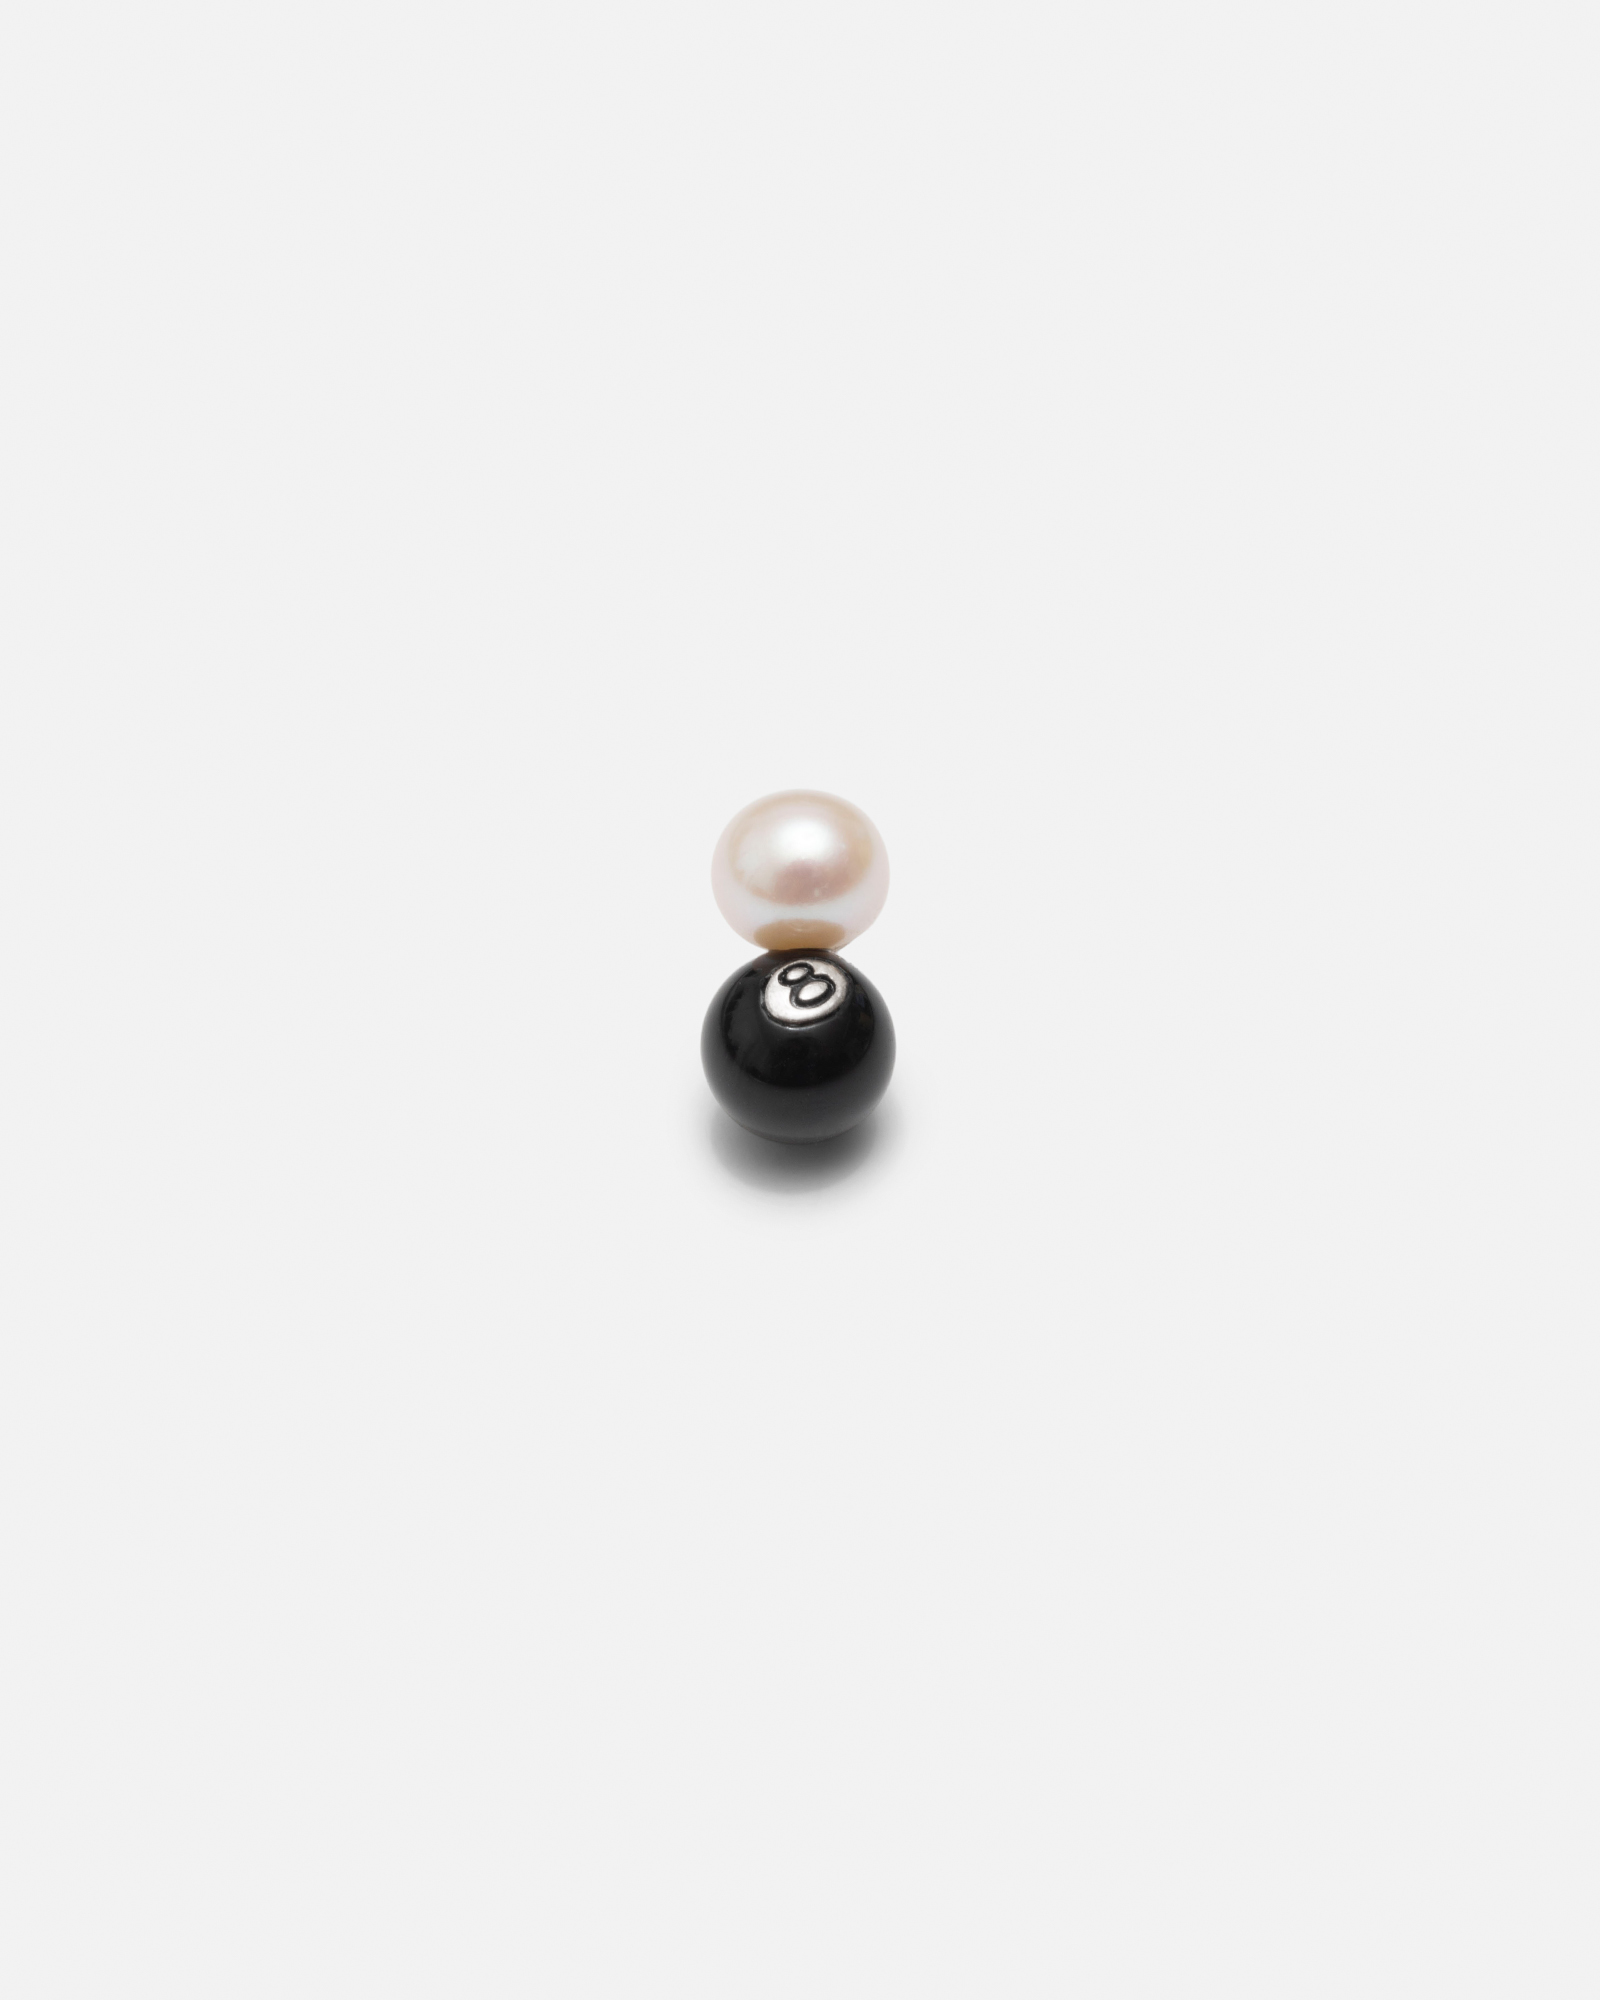 Of Course, Stüssy's First Jewelry Collection Has 8-Ball Earrings